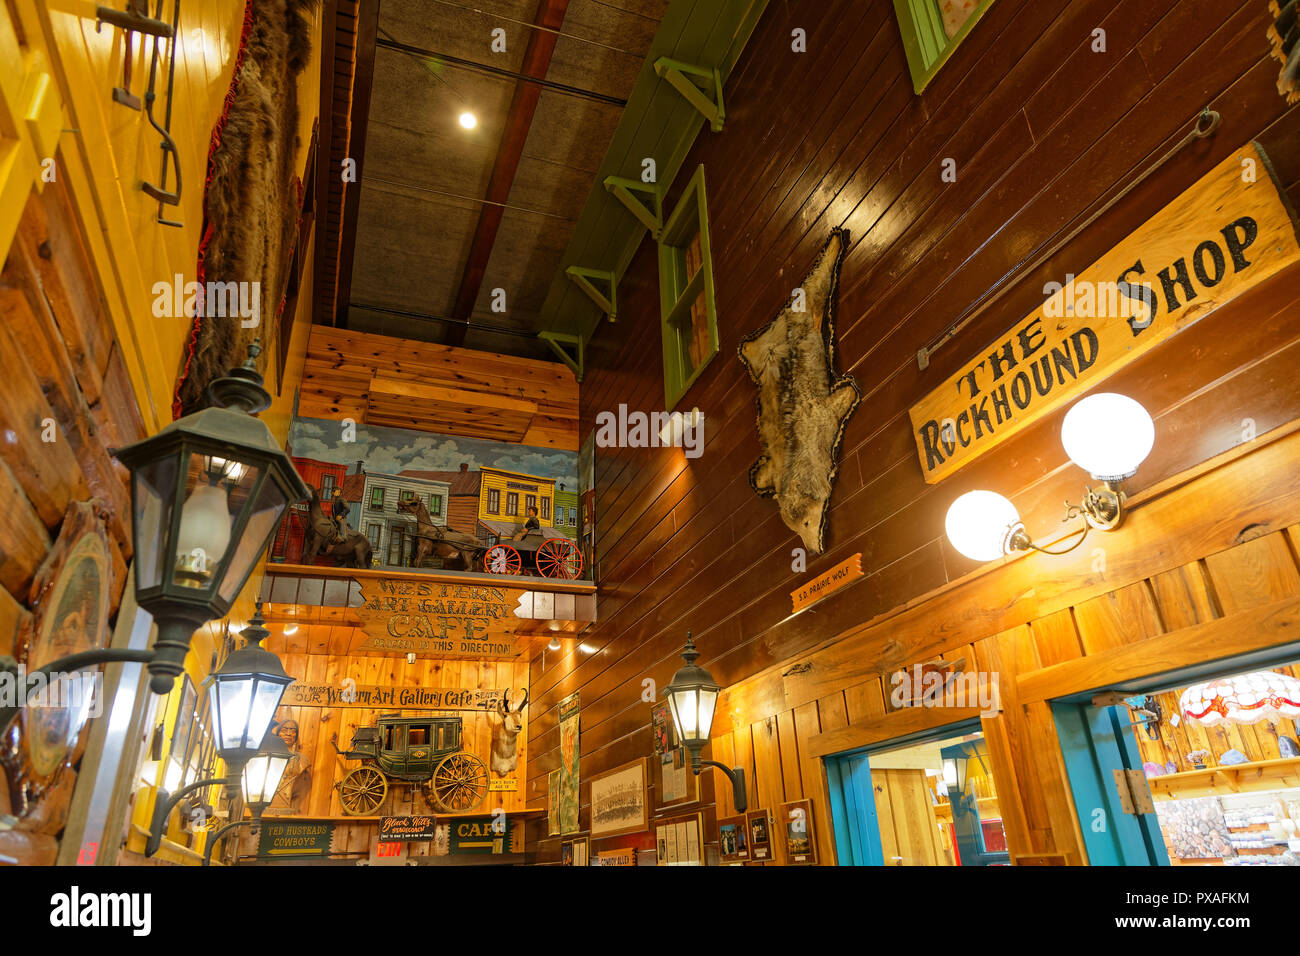 WALL, SOUTH DAKOTA, September 12, 2018 : Inside the Wall Drug Store, both a drugstore and a touristic attraction in the town center of Wall, South Dak Stock Photo